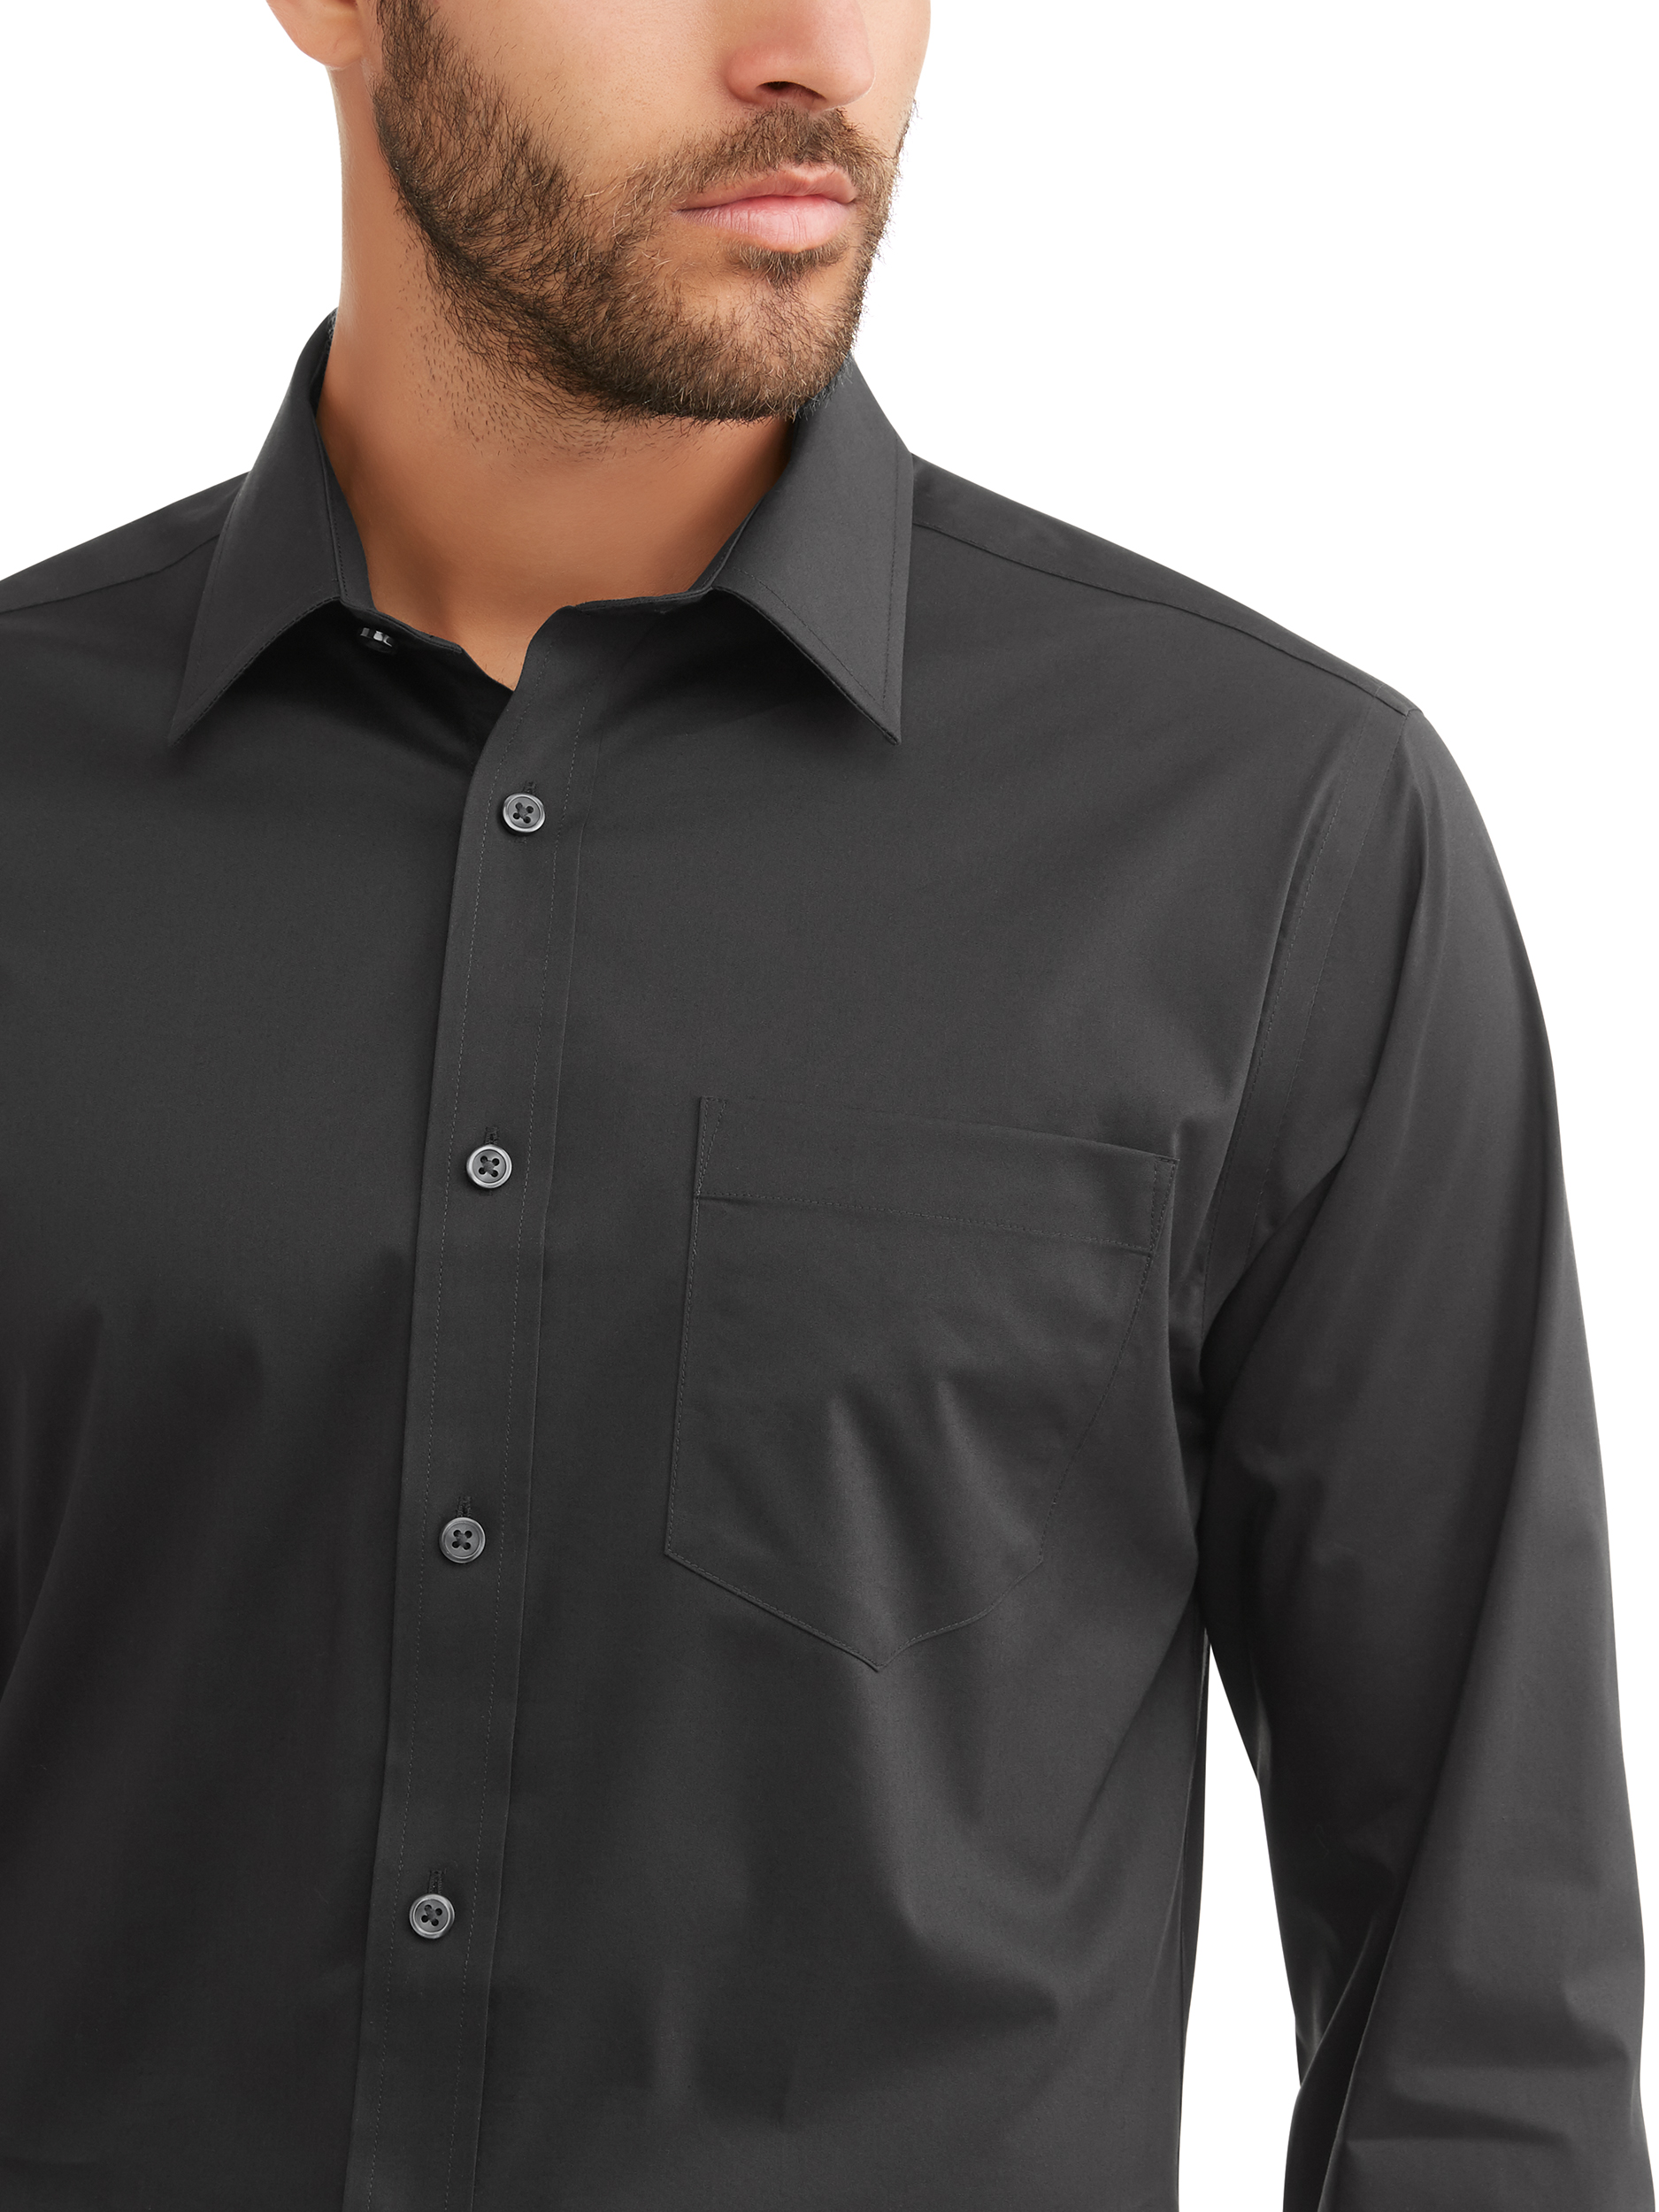 George Men's Long Sleeve Performance Slim Fit Dress Shirt, Up to 3XL - image 3 of 5